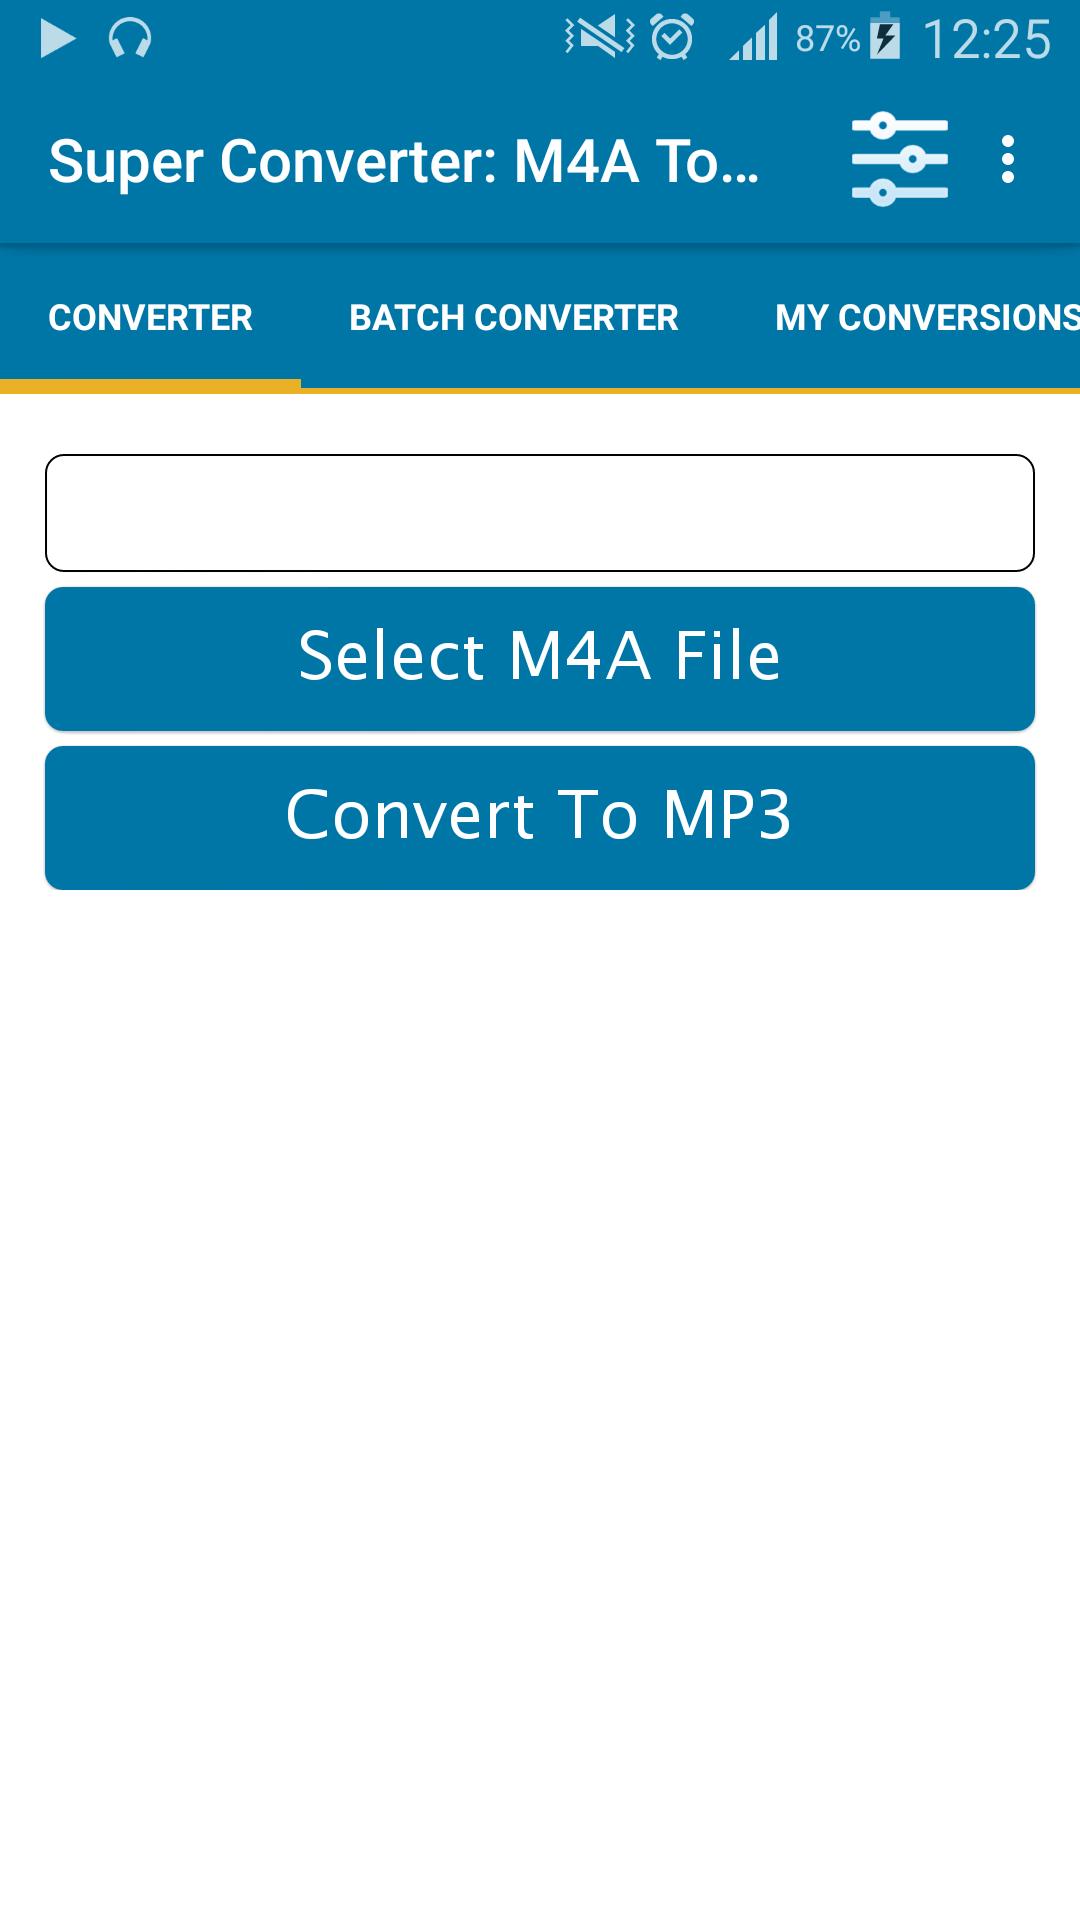 Super Converter : M4A To MP3 for Android - APK Download